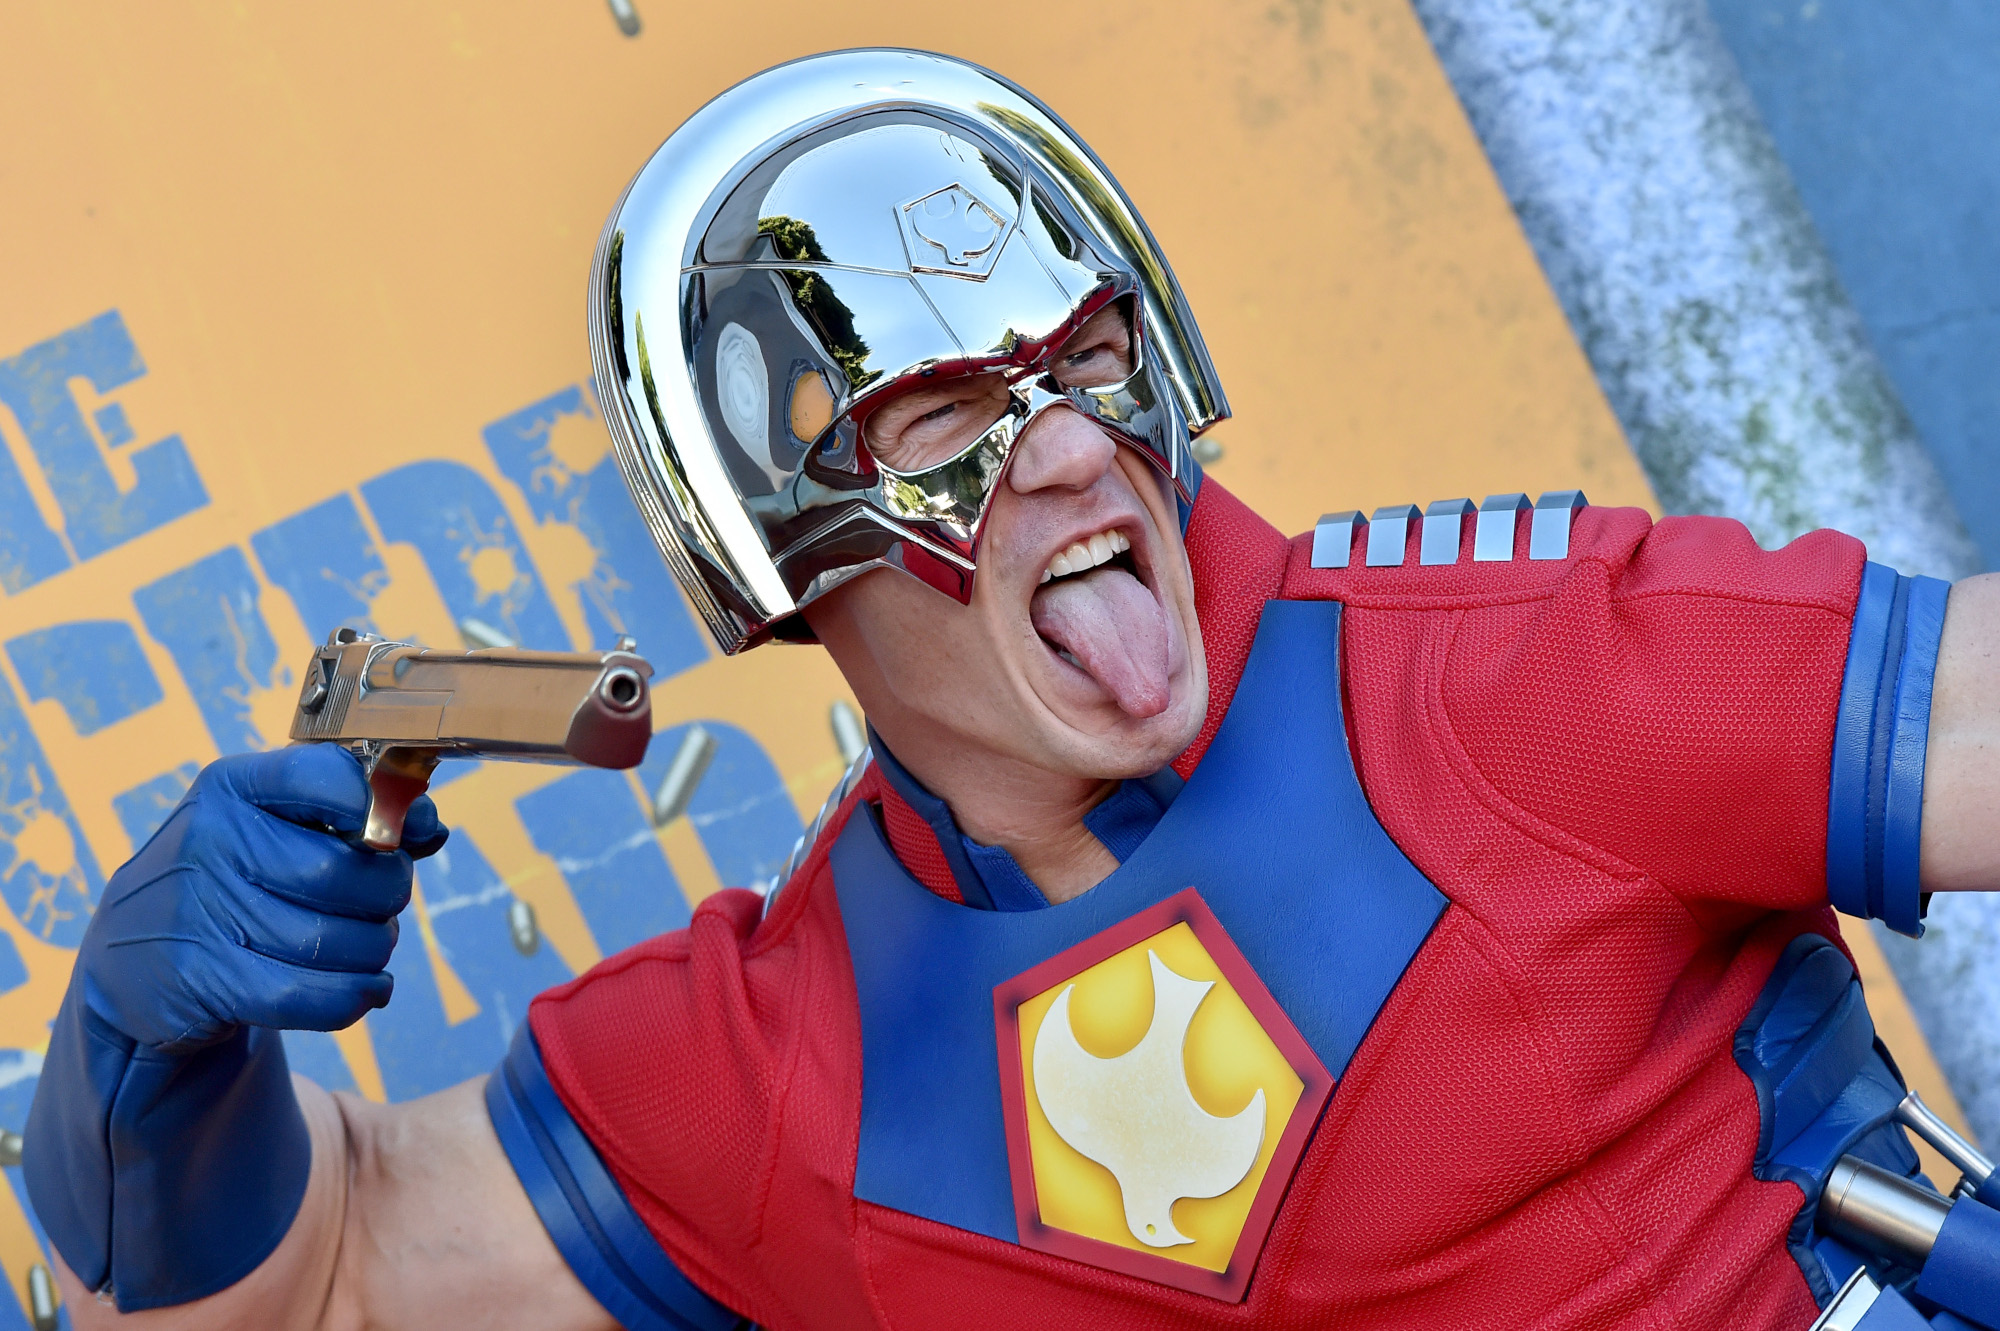 John Cena dressed as Peacemaker at 'The Suicide Squad' premiere. He's wearing a silver helmet and red, yellow, and blue spandex shirt. He's sticking his tongue out and holding a fake gun up.